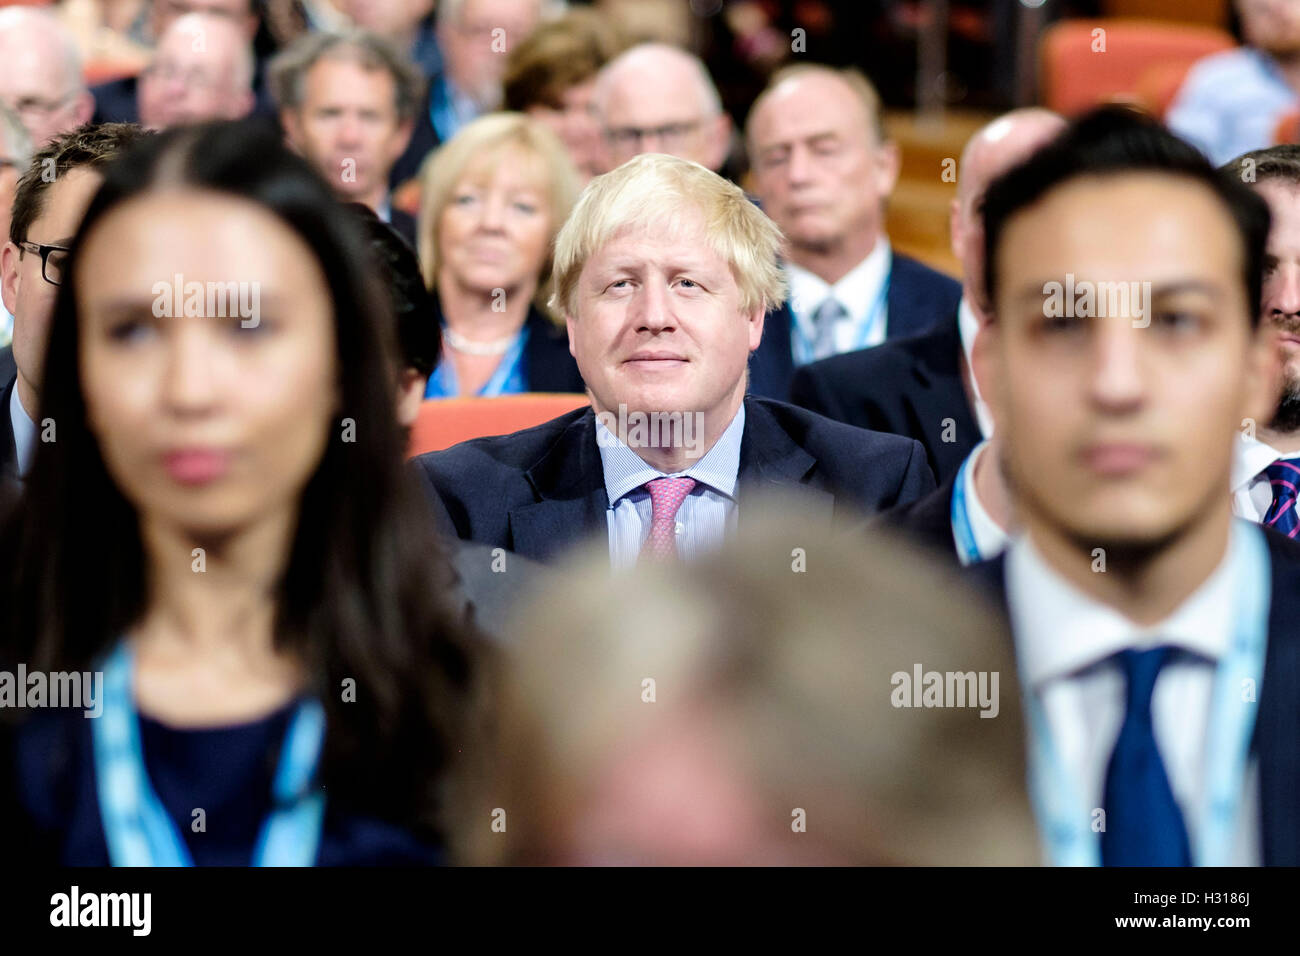 Conservative Party Conference day 2 on 03/10/2016 at Birmingham ICC, Birmingham. Persons pictured: Boris Johnson MP in the audience listening. Picture by Julie Edwards. Stock Photo